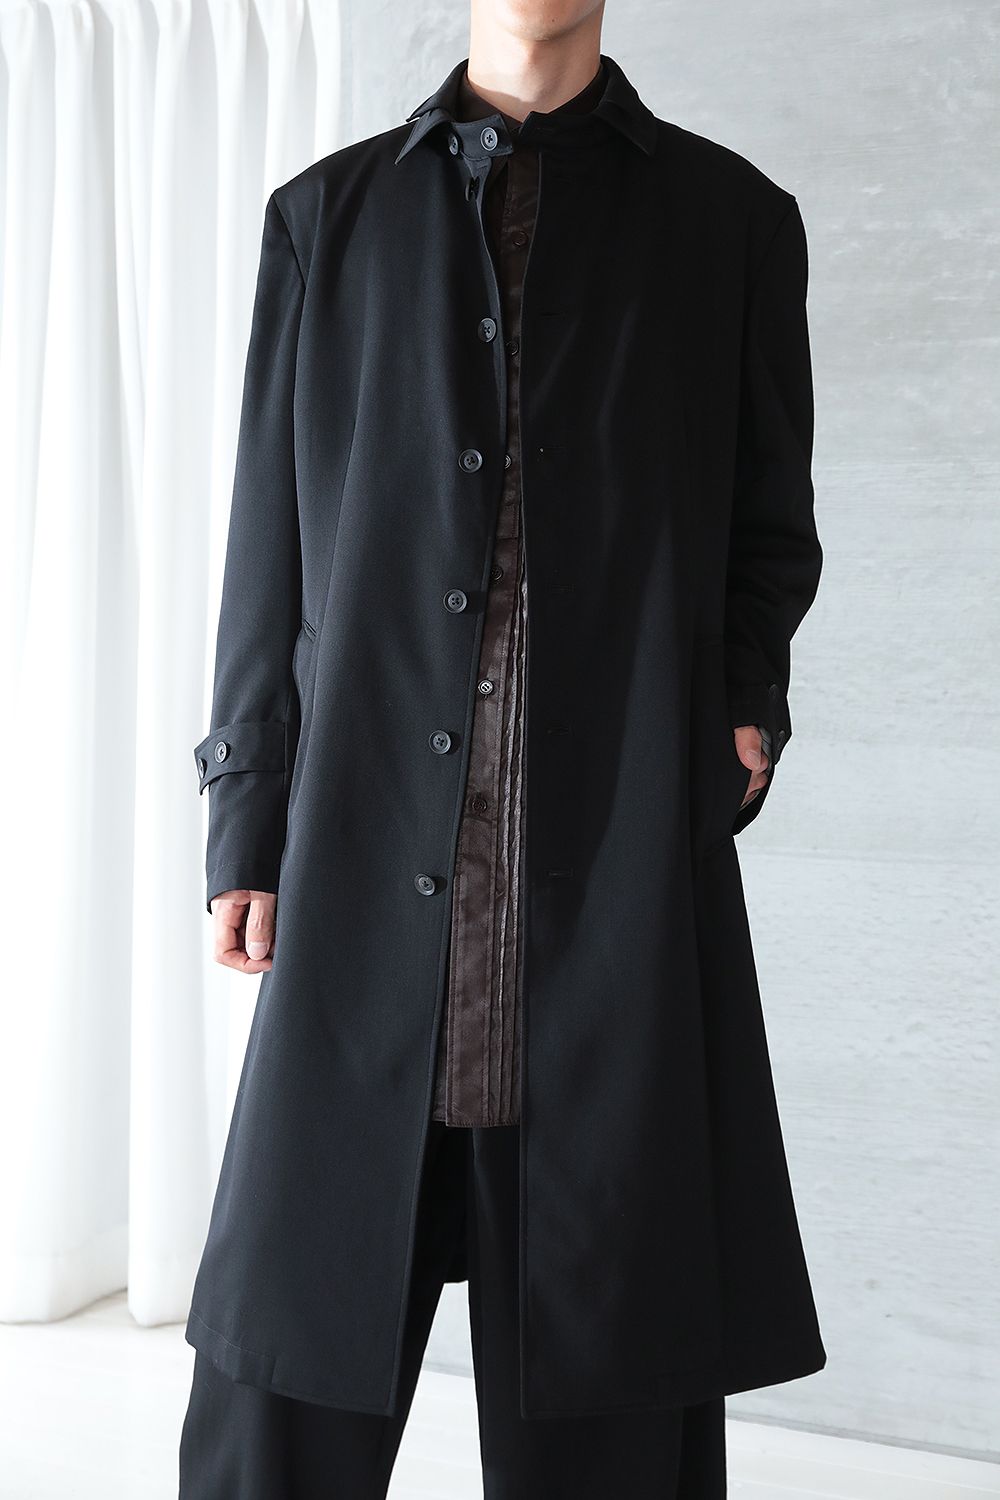 Homme/Y's/discord】22AW - MODESTY COLLECTIONS from Yohji Yamamoto